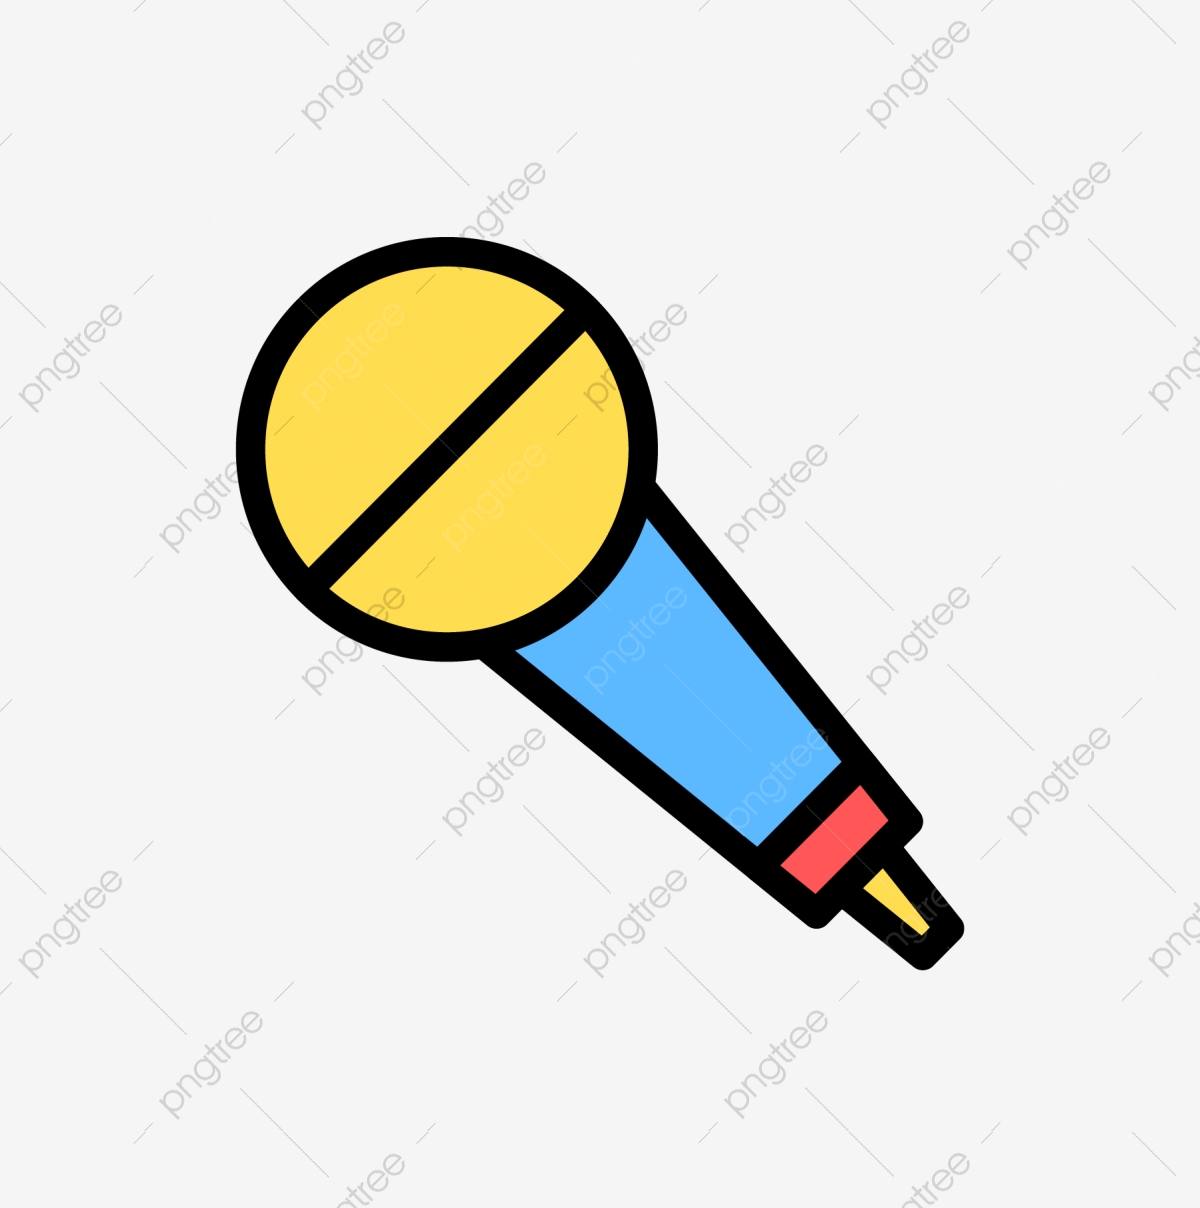 microphone clipart colourful